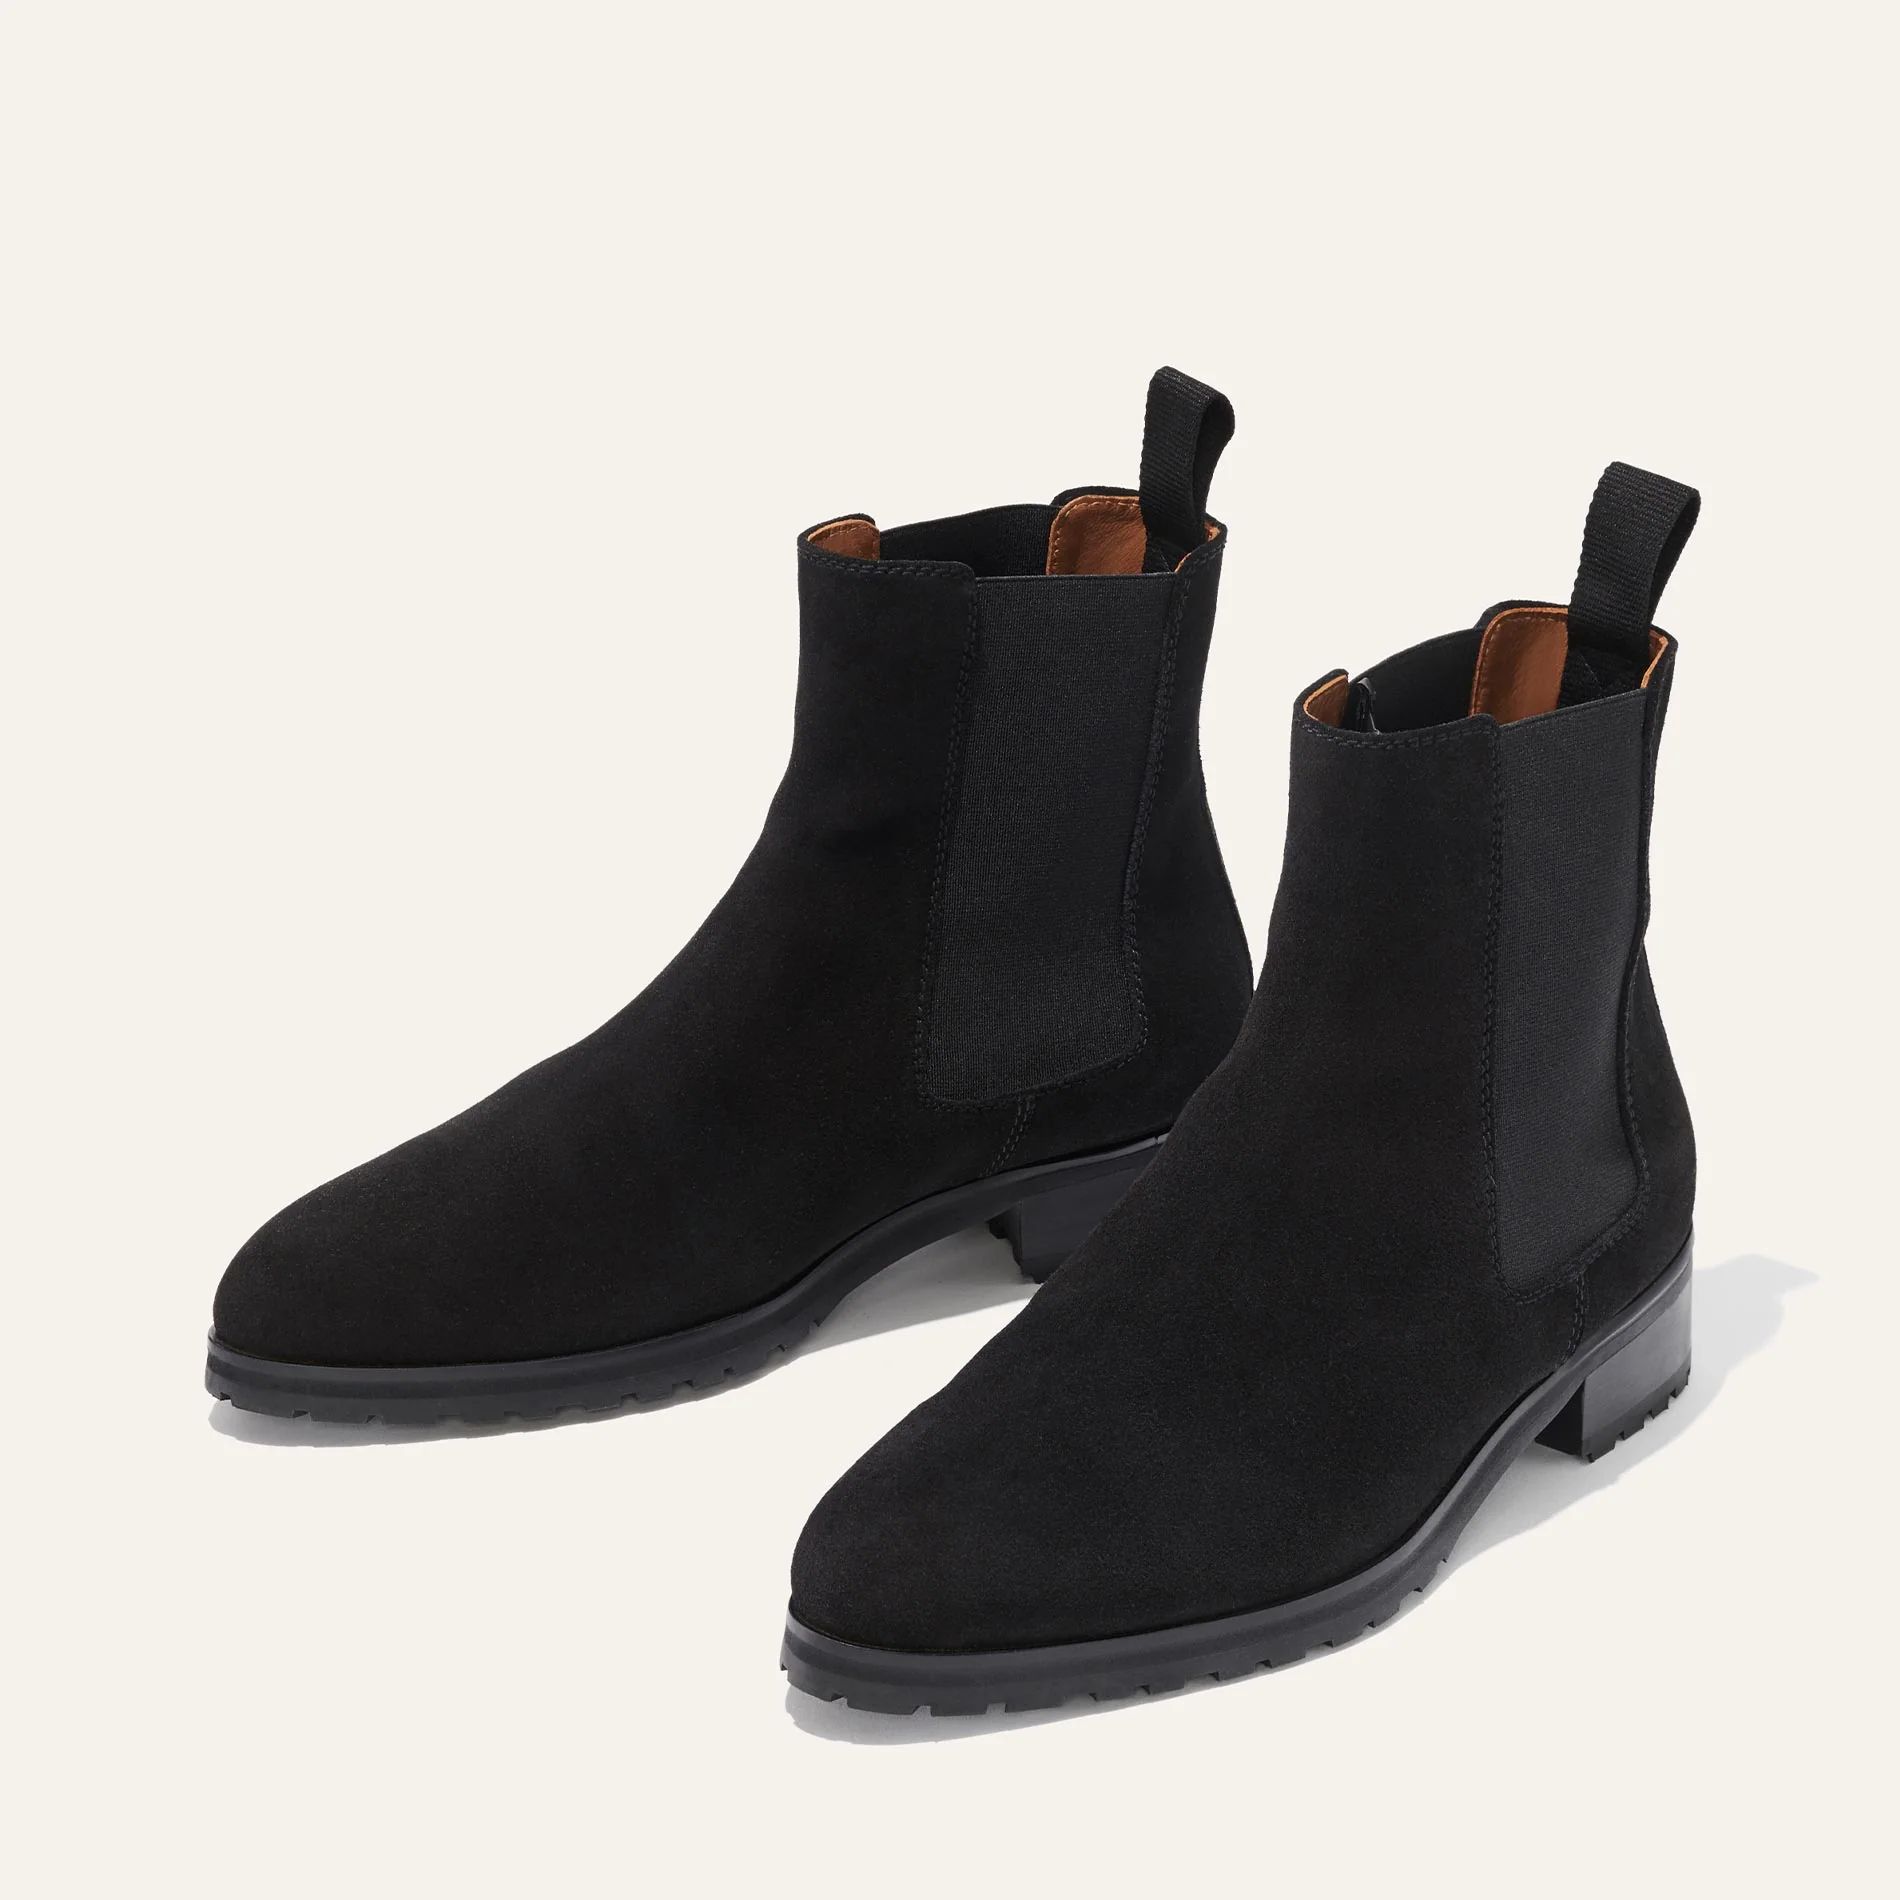 The Chelsea Boot - Black Suede | Margaux